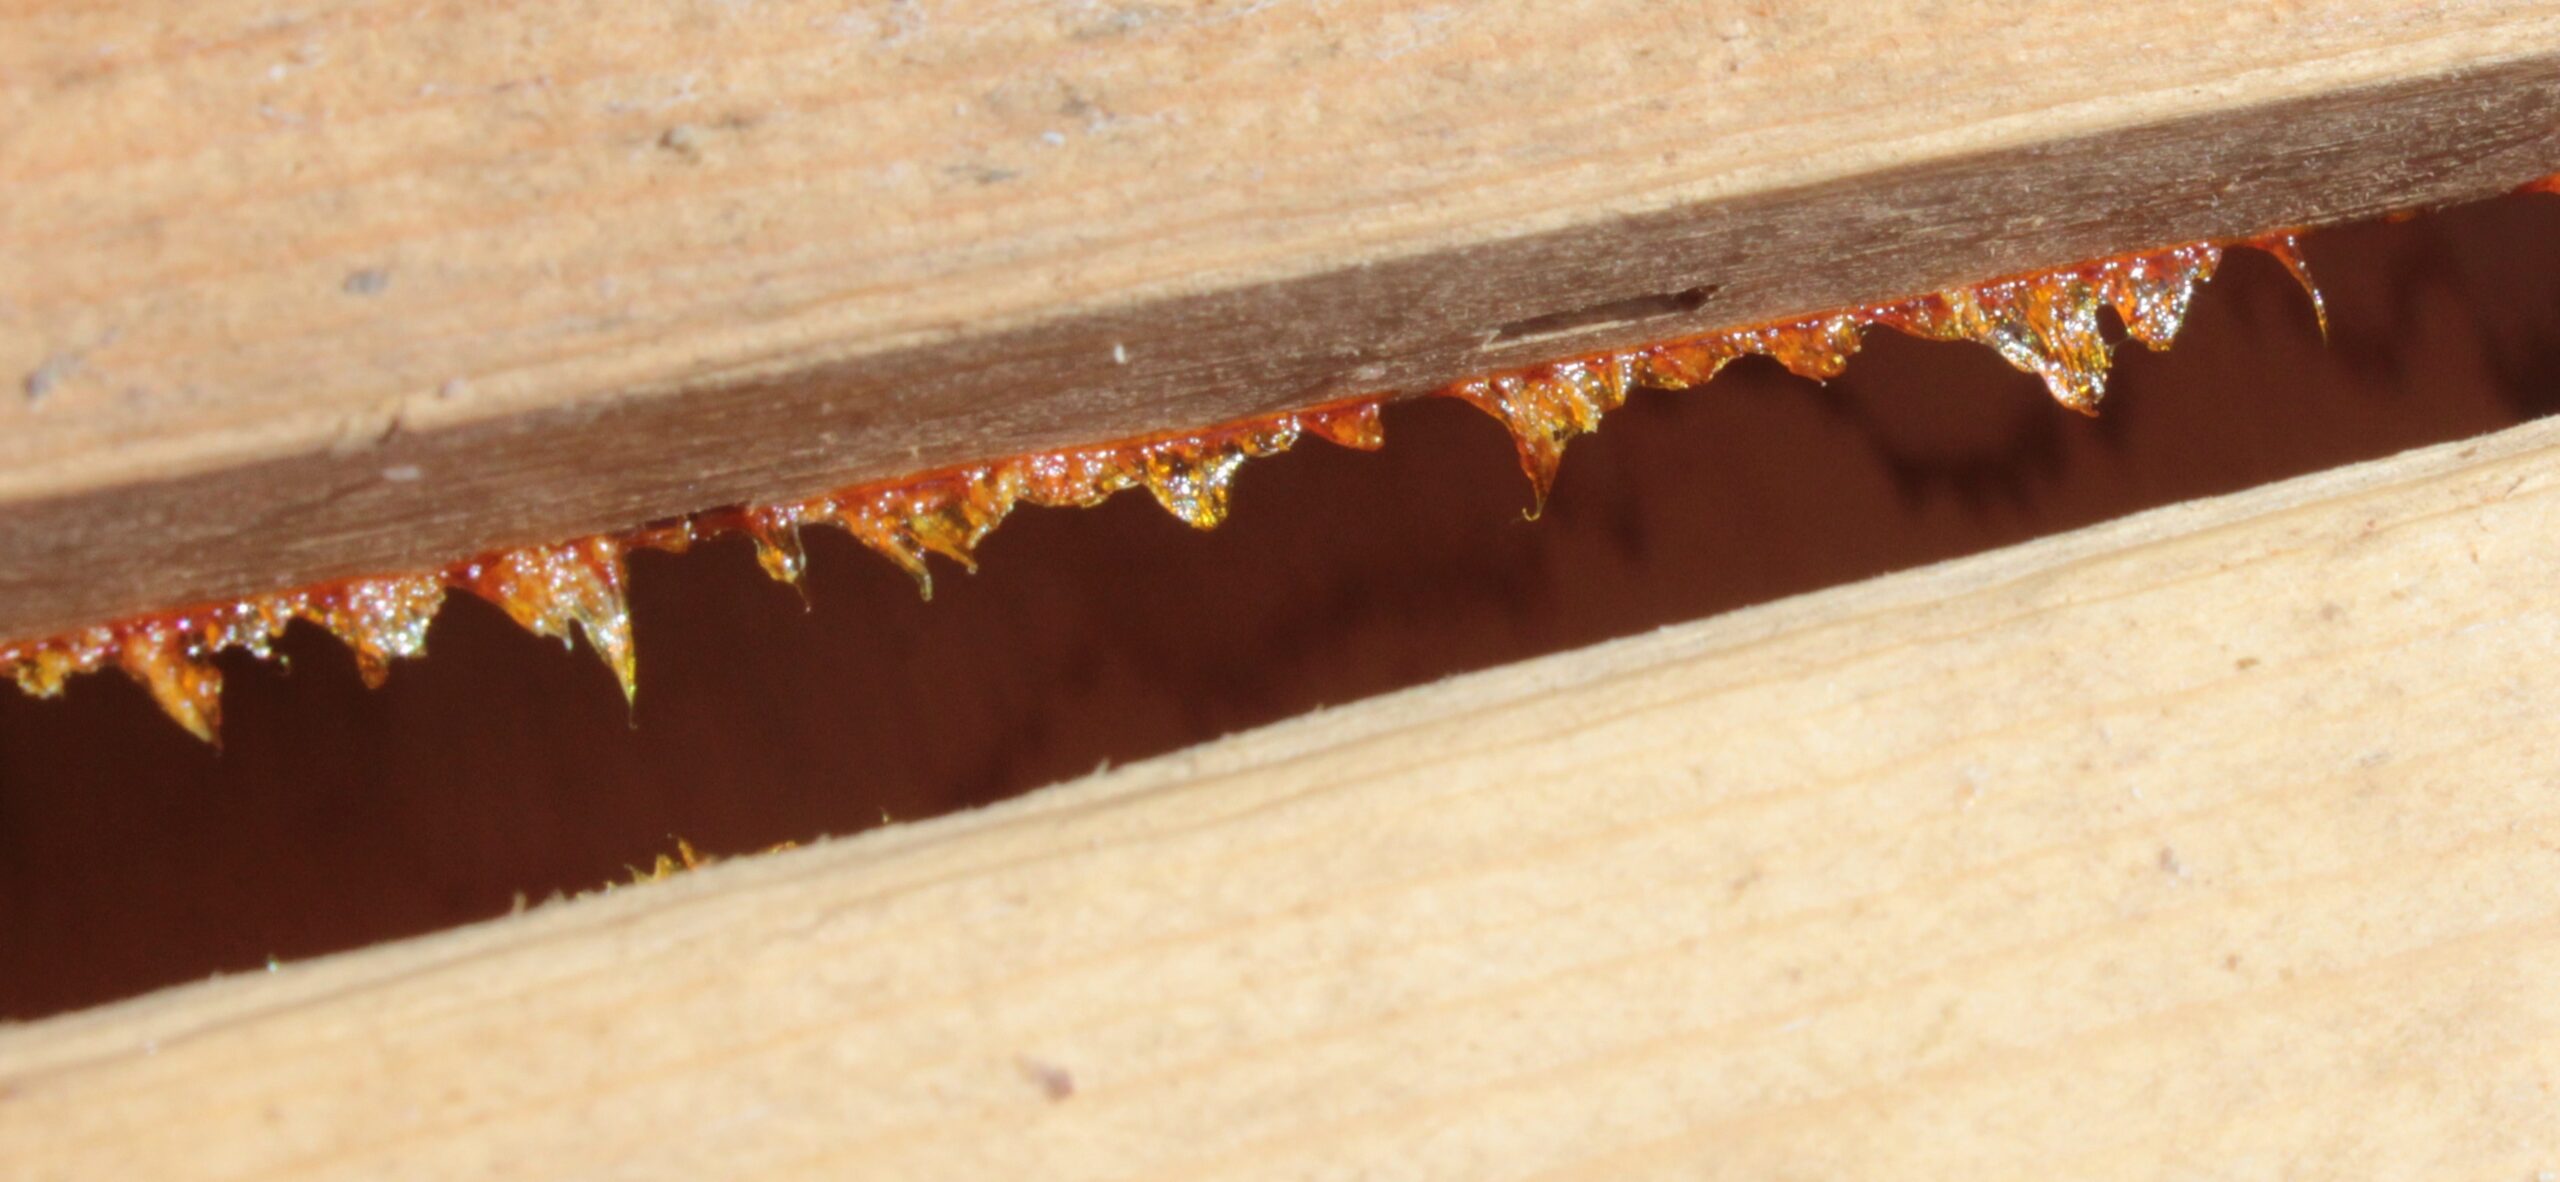 Two bars of a top bar hive pulled apart, showing the sticky propolis that held them together.
TIKTAALIKBREEDER/WIKIMEDIA COMMONS,  <a href=